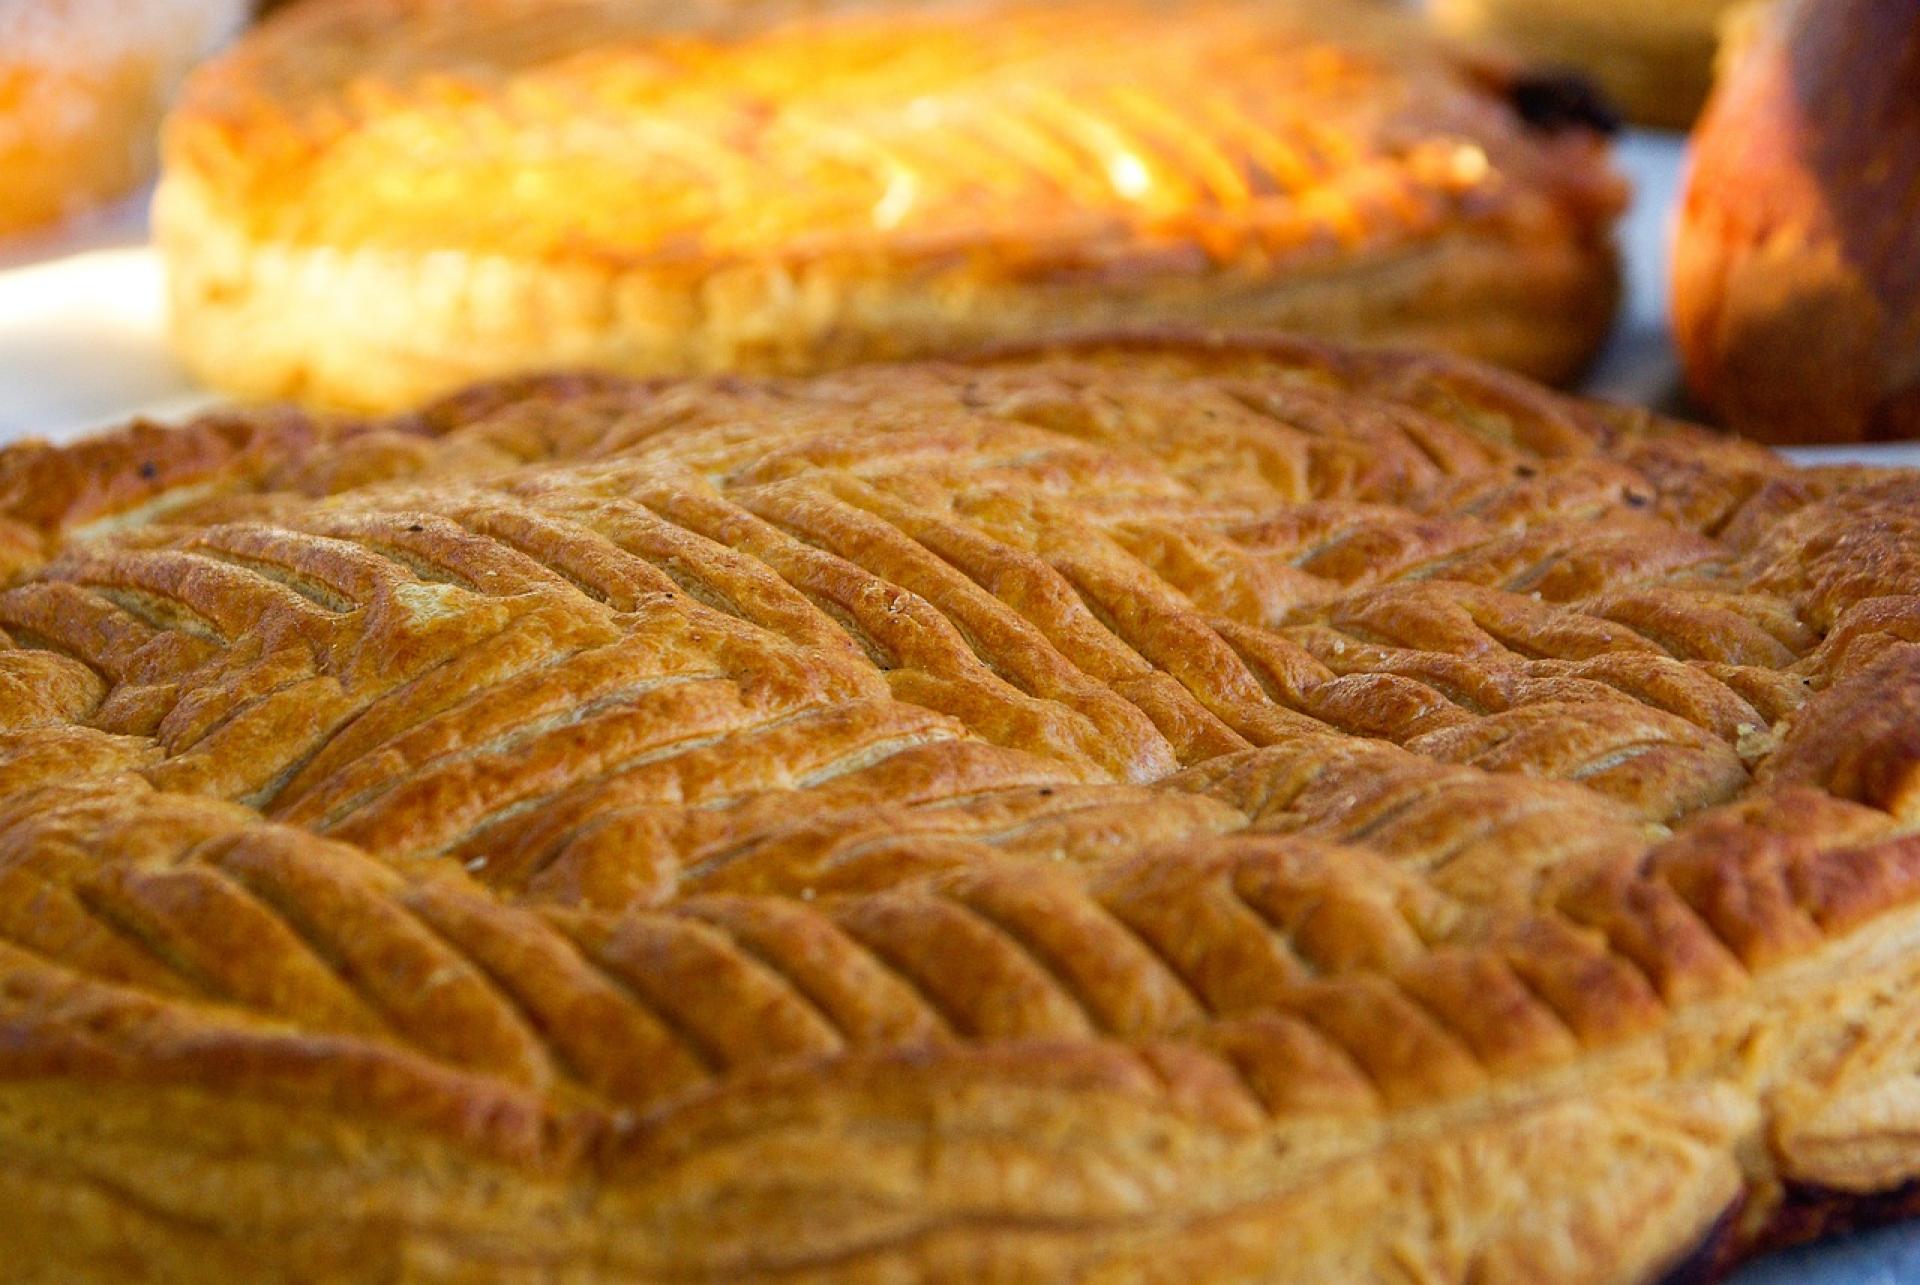 January is the month of the Galette des Rois !